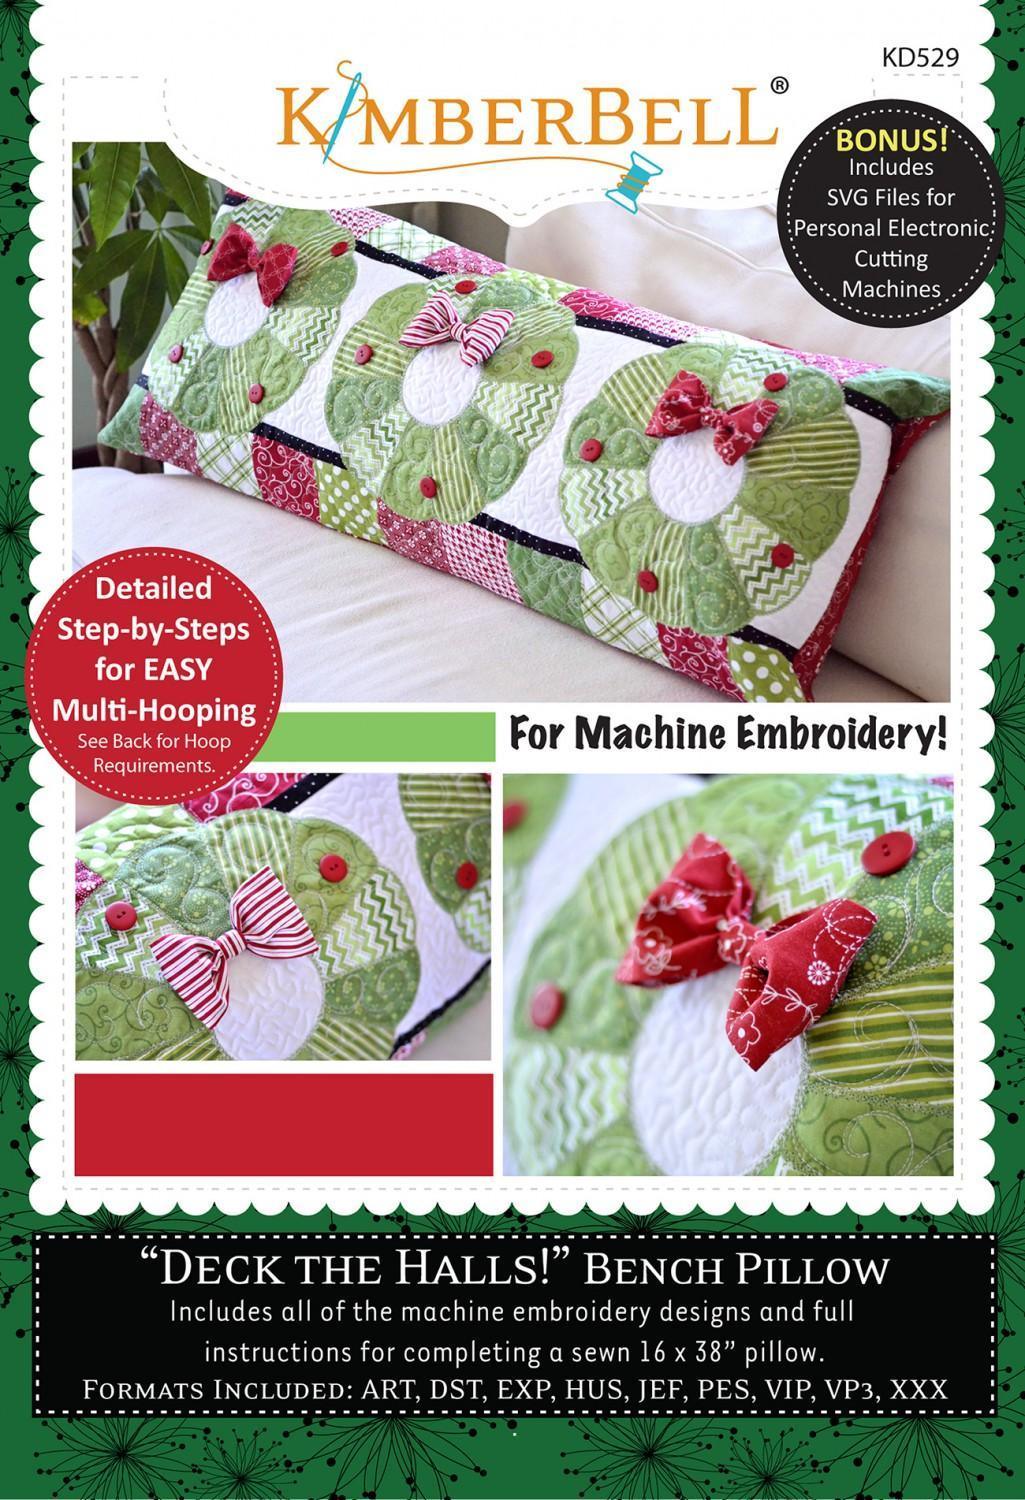 Deck the Halls - Bench Pillow - Machine Embroidery CD - Kimberbell - Kawartha Quilting and Sewing LTD.